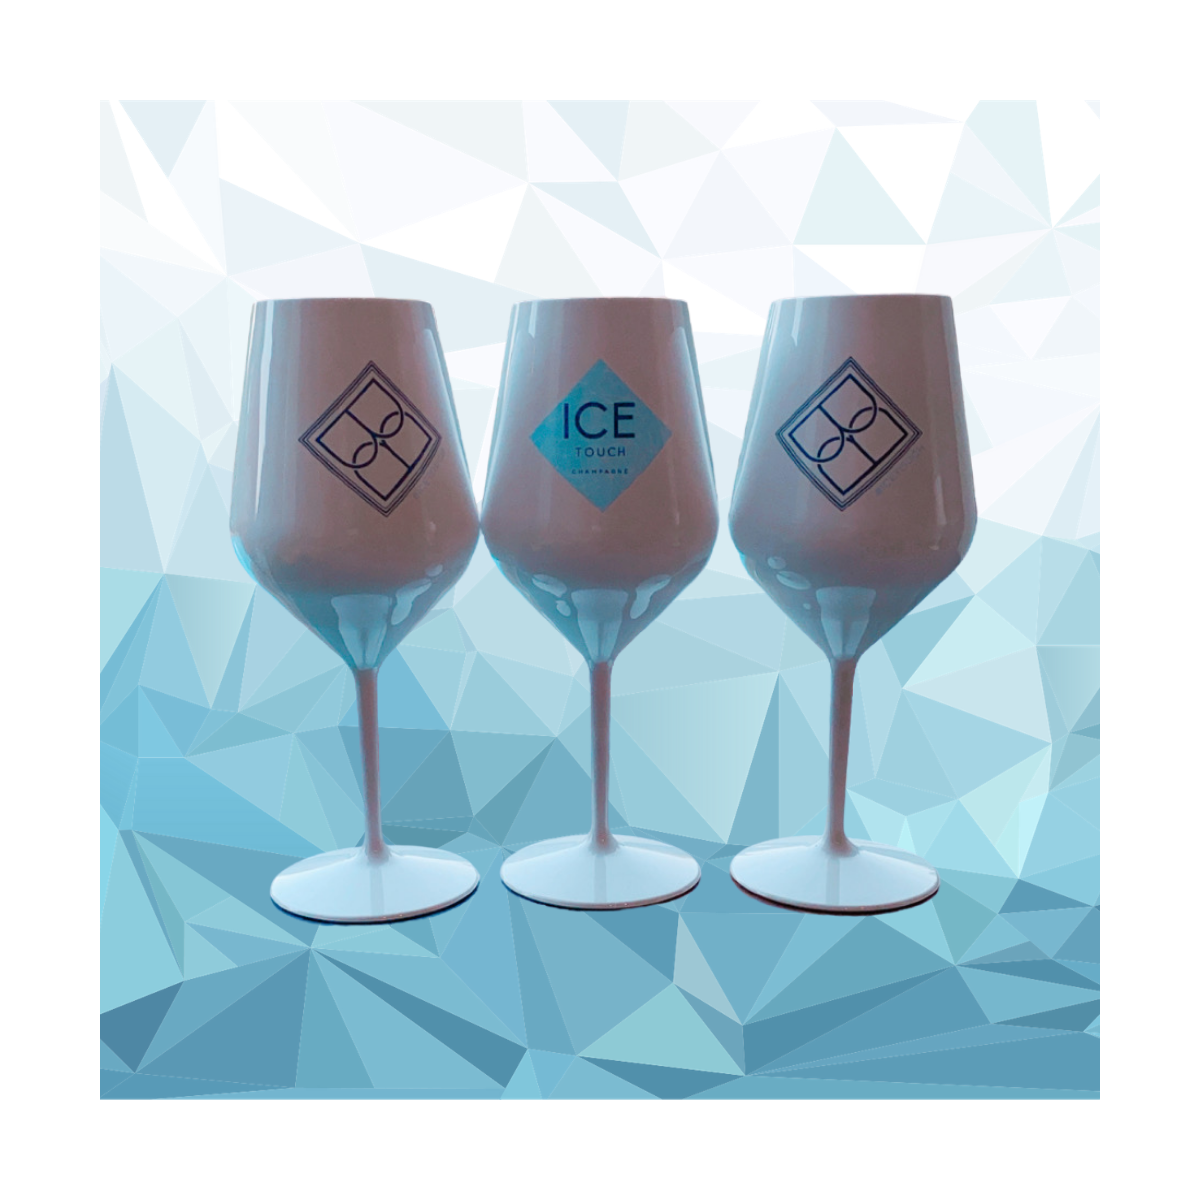 6 Verres à Cocktail ICE TOUCH | Champagne Boude Baudin